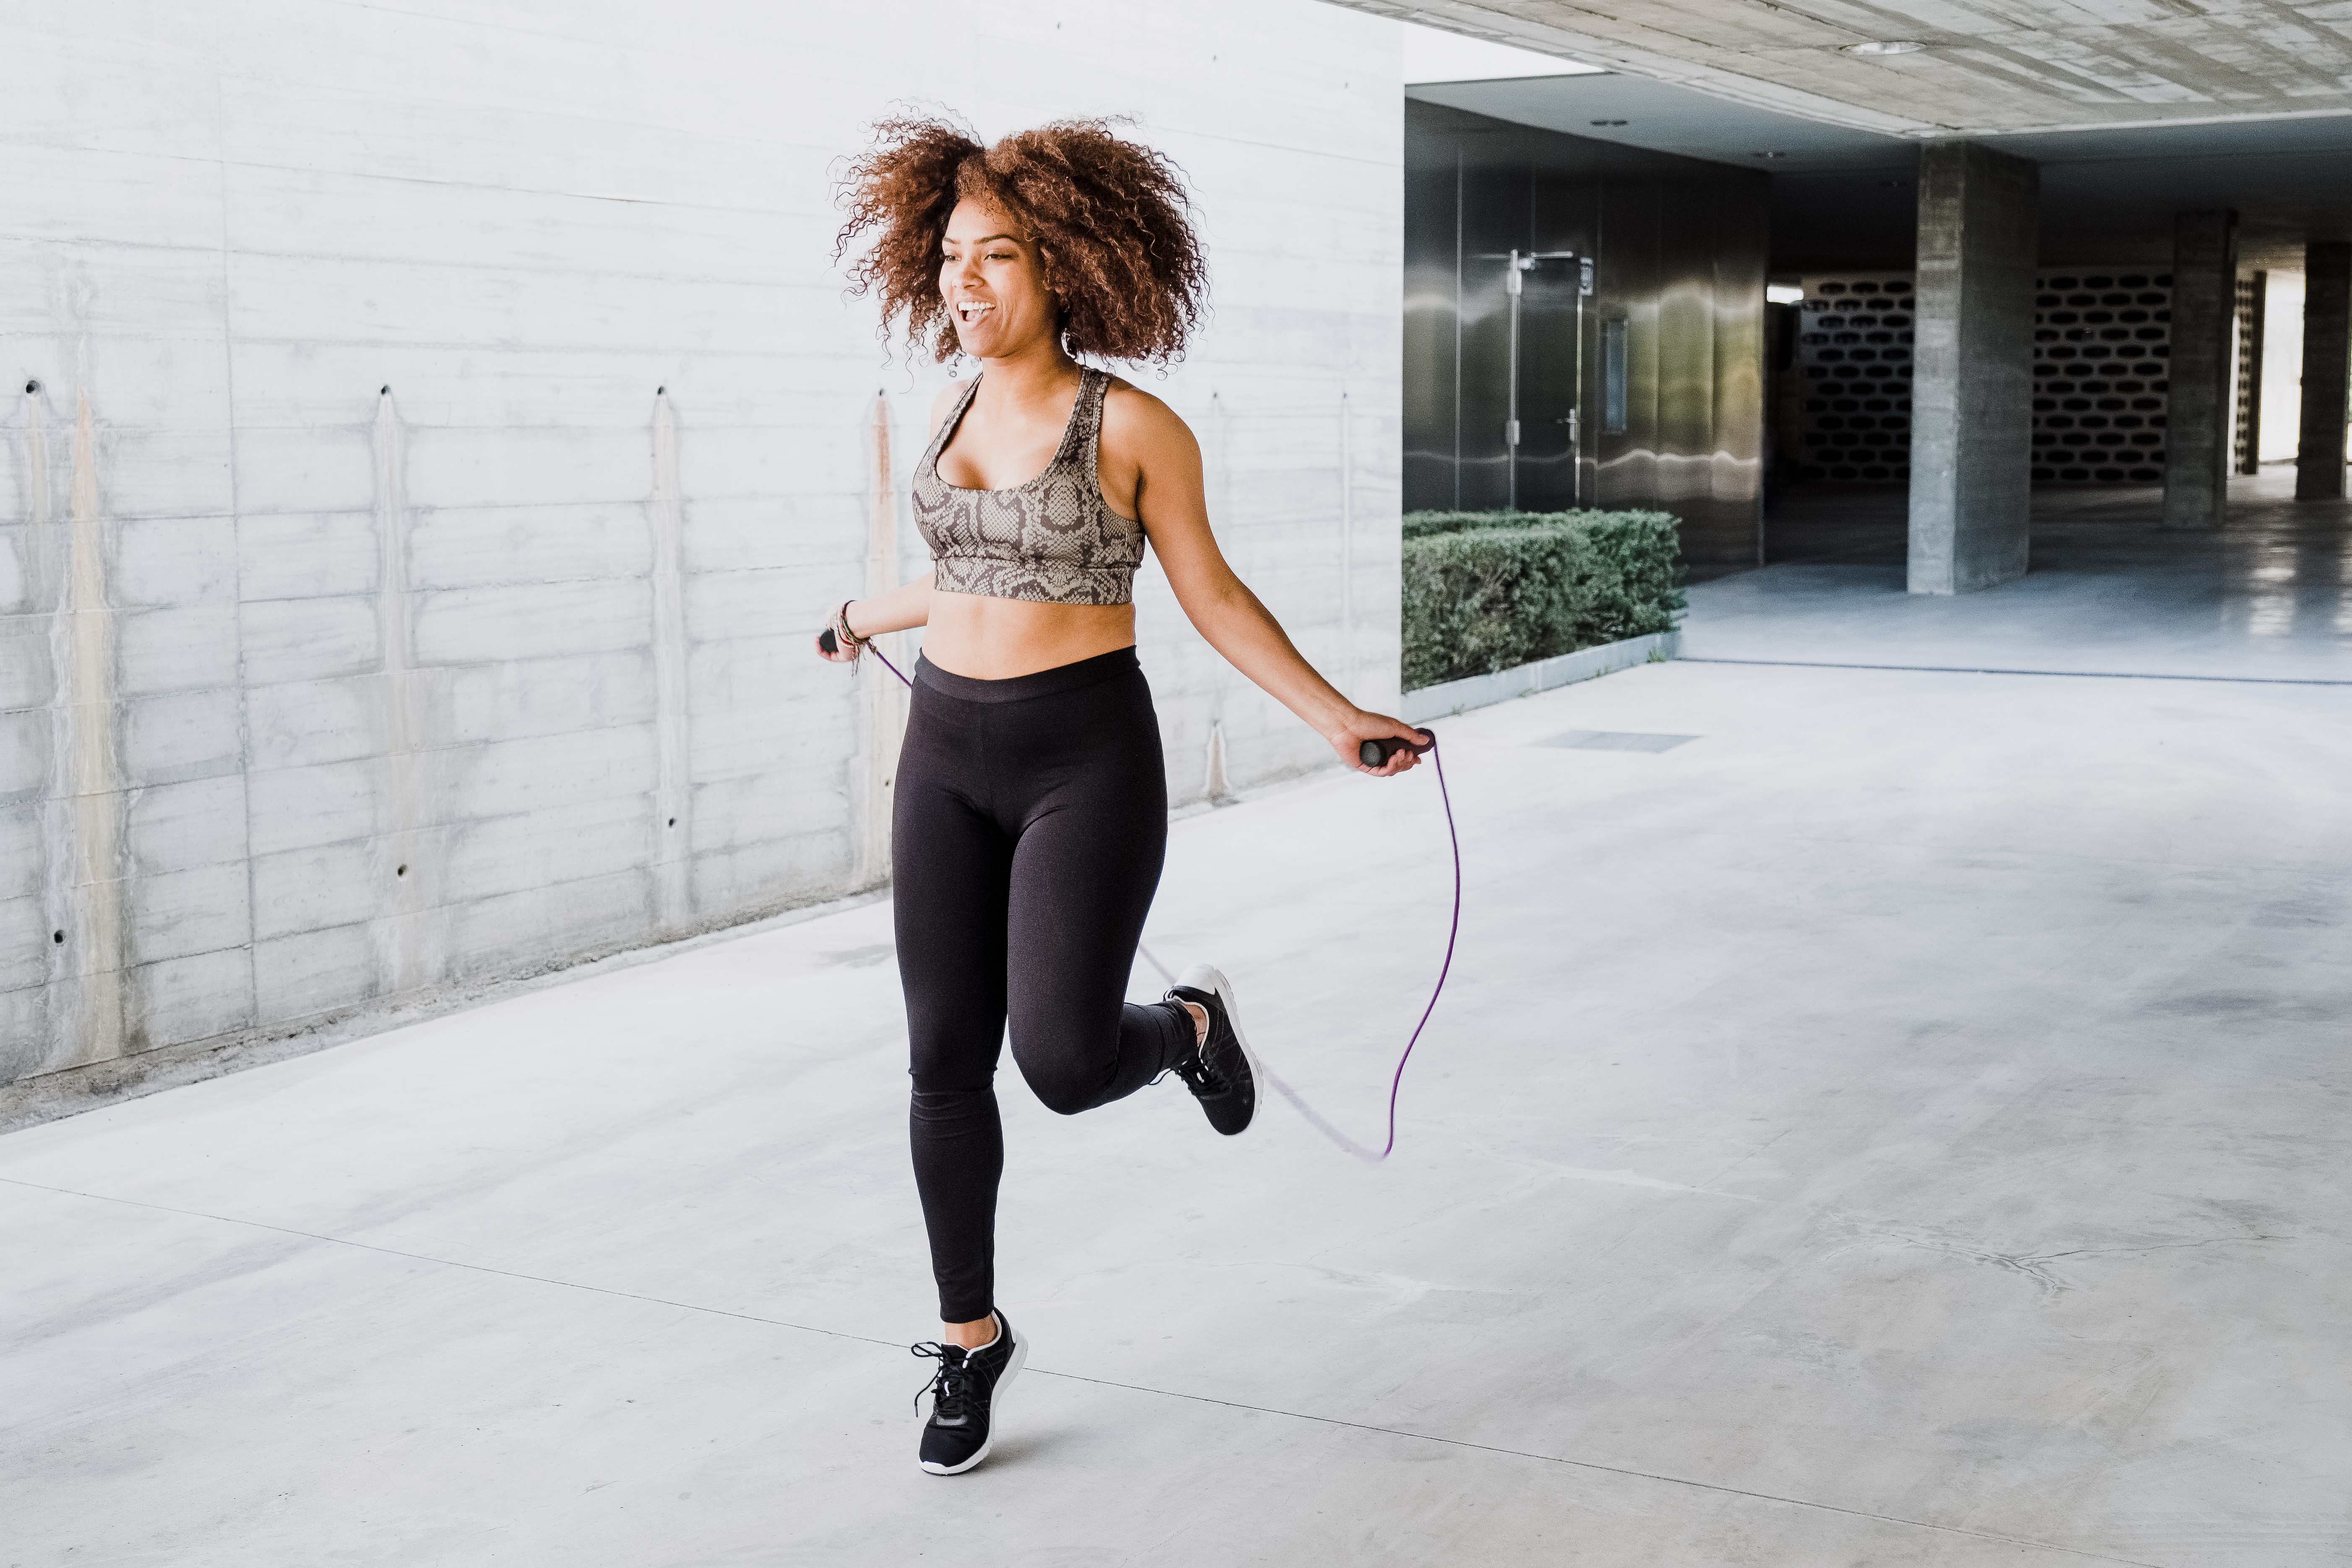 Jump Rope Length: How Long Should a Jump Rope Be?